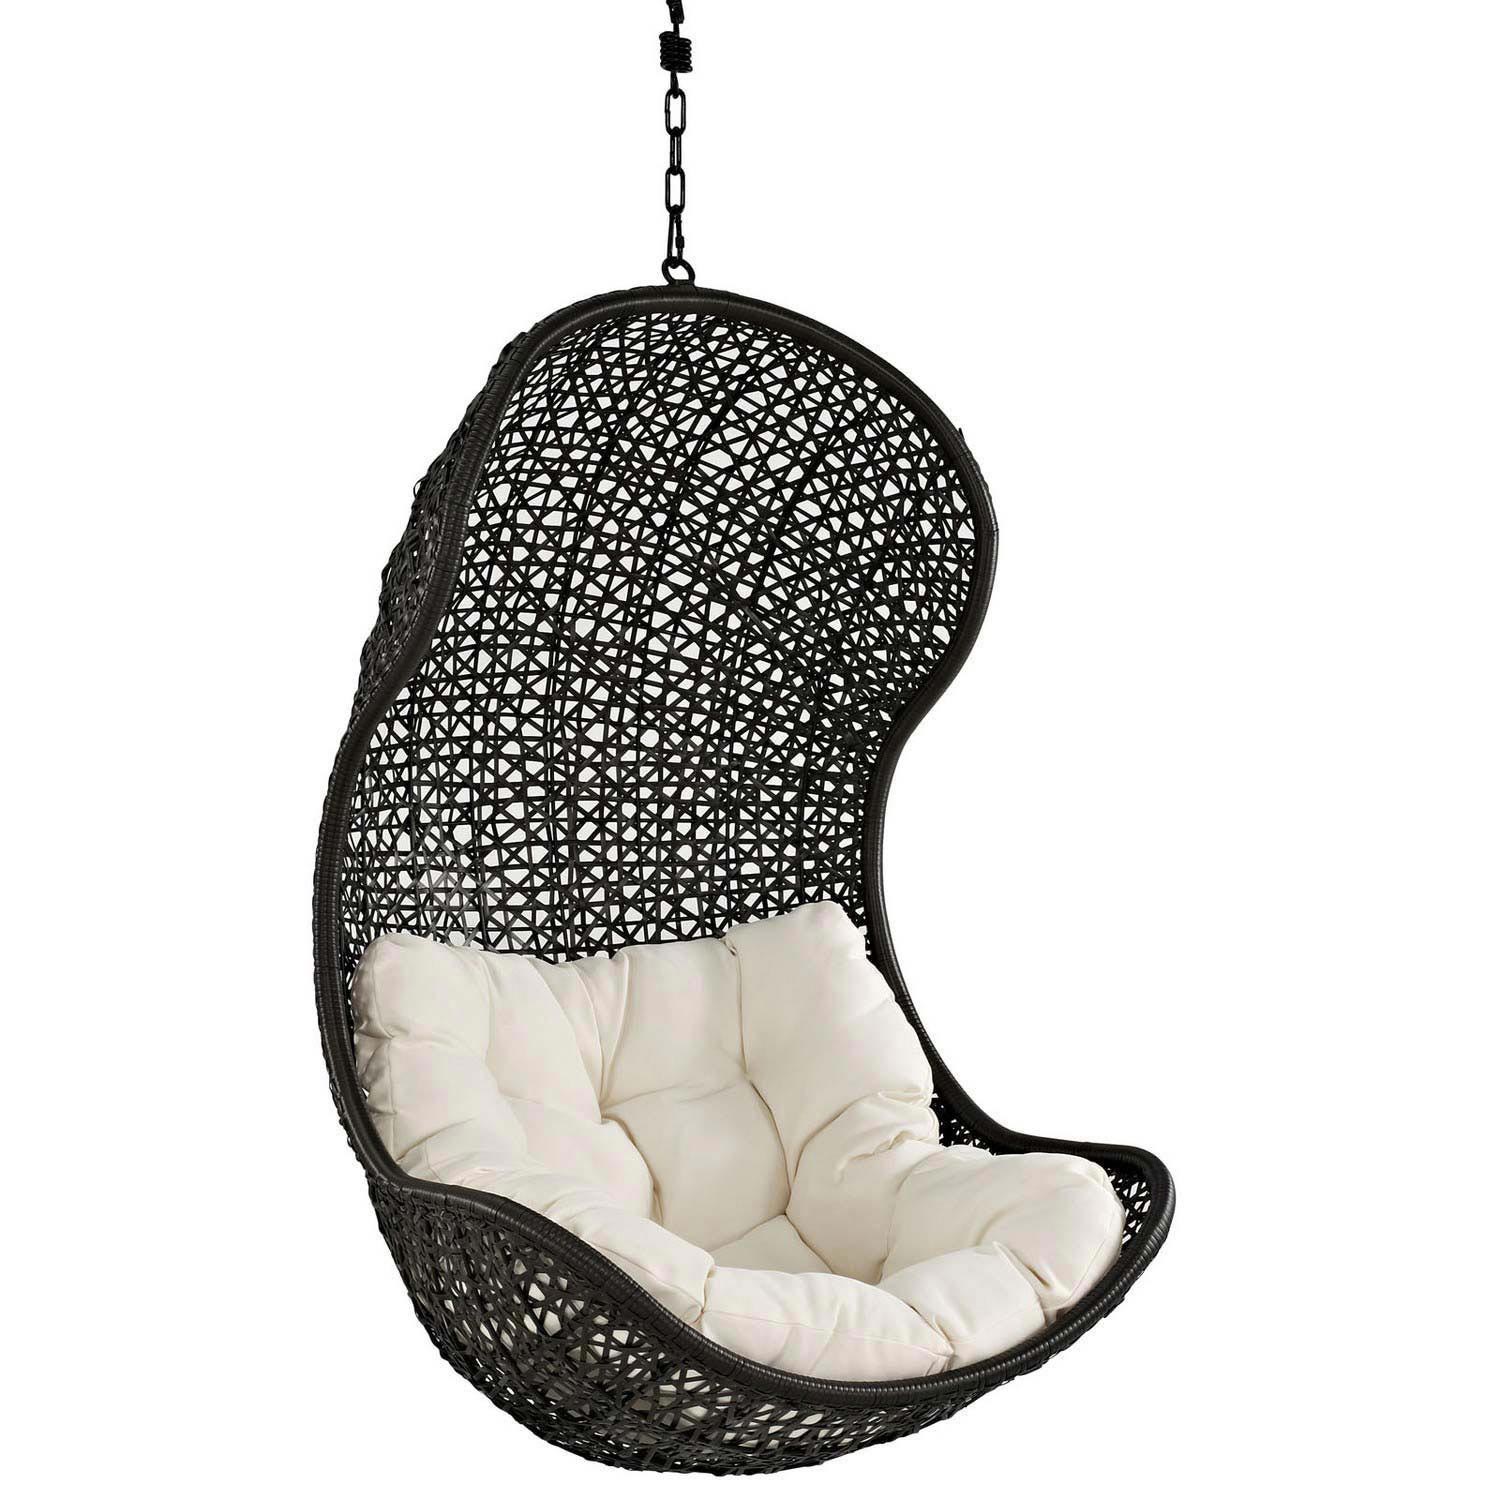 Modway Parlay Swing Outdoor Patio Lounge Chair - Espresso/White